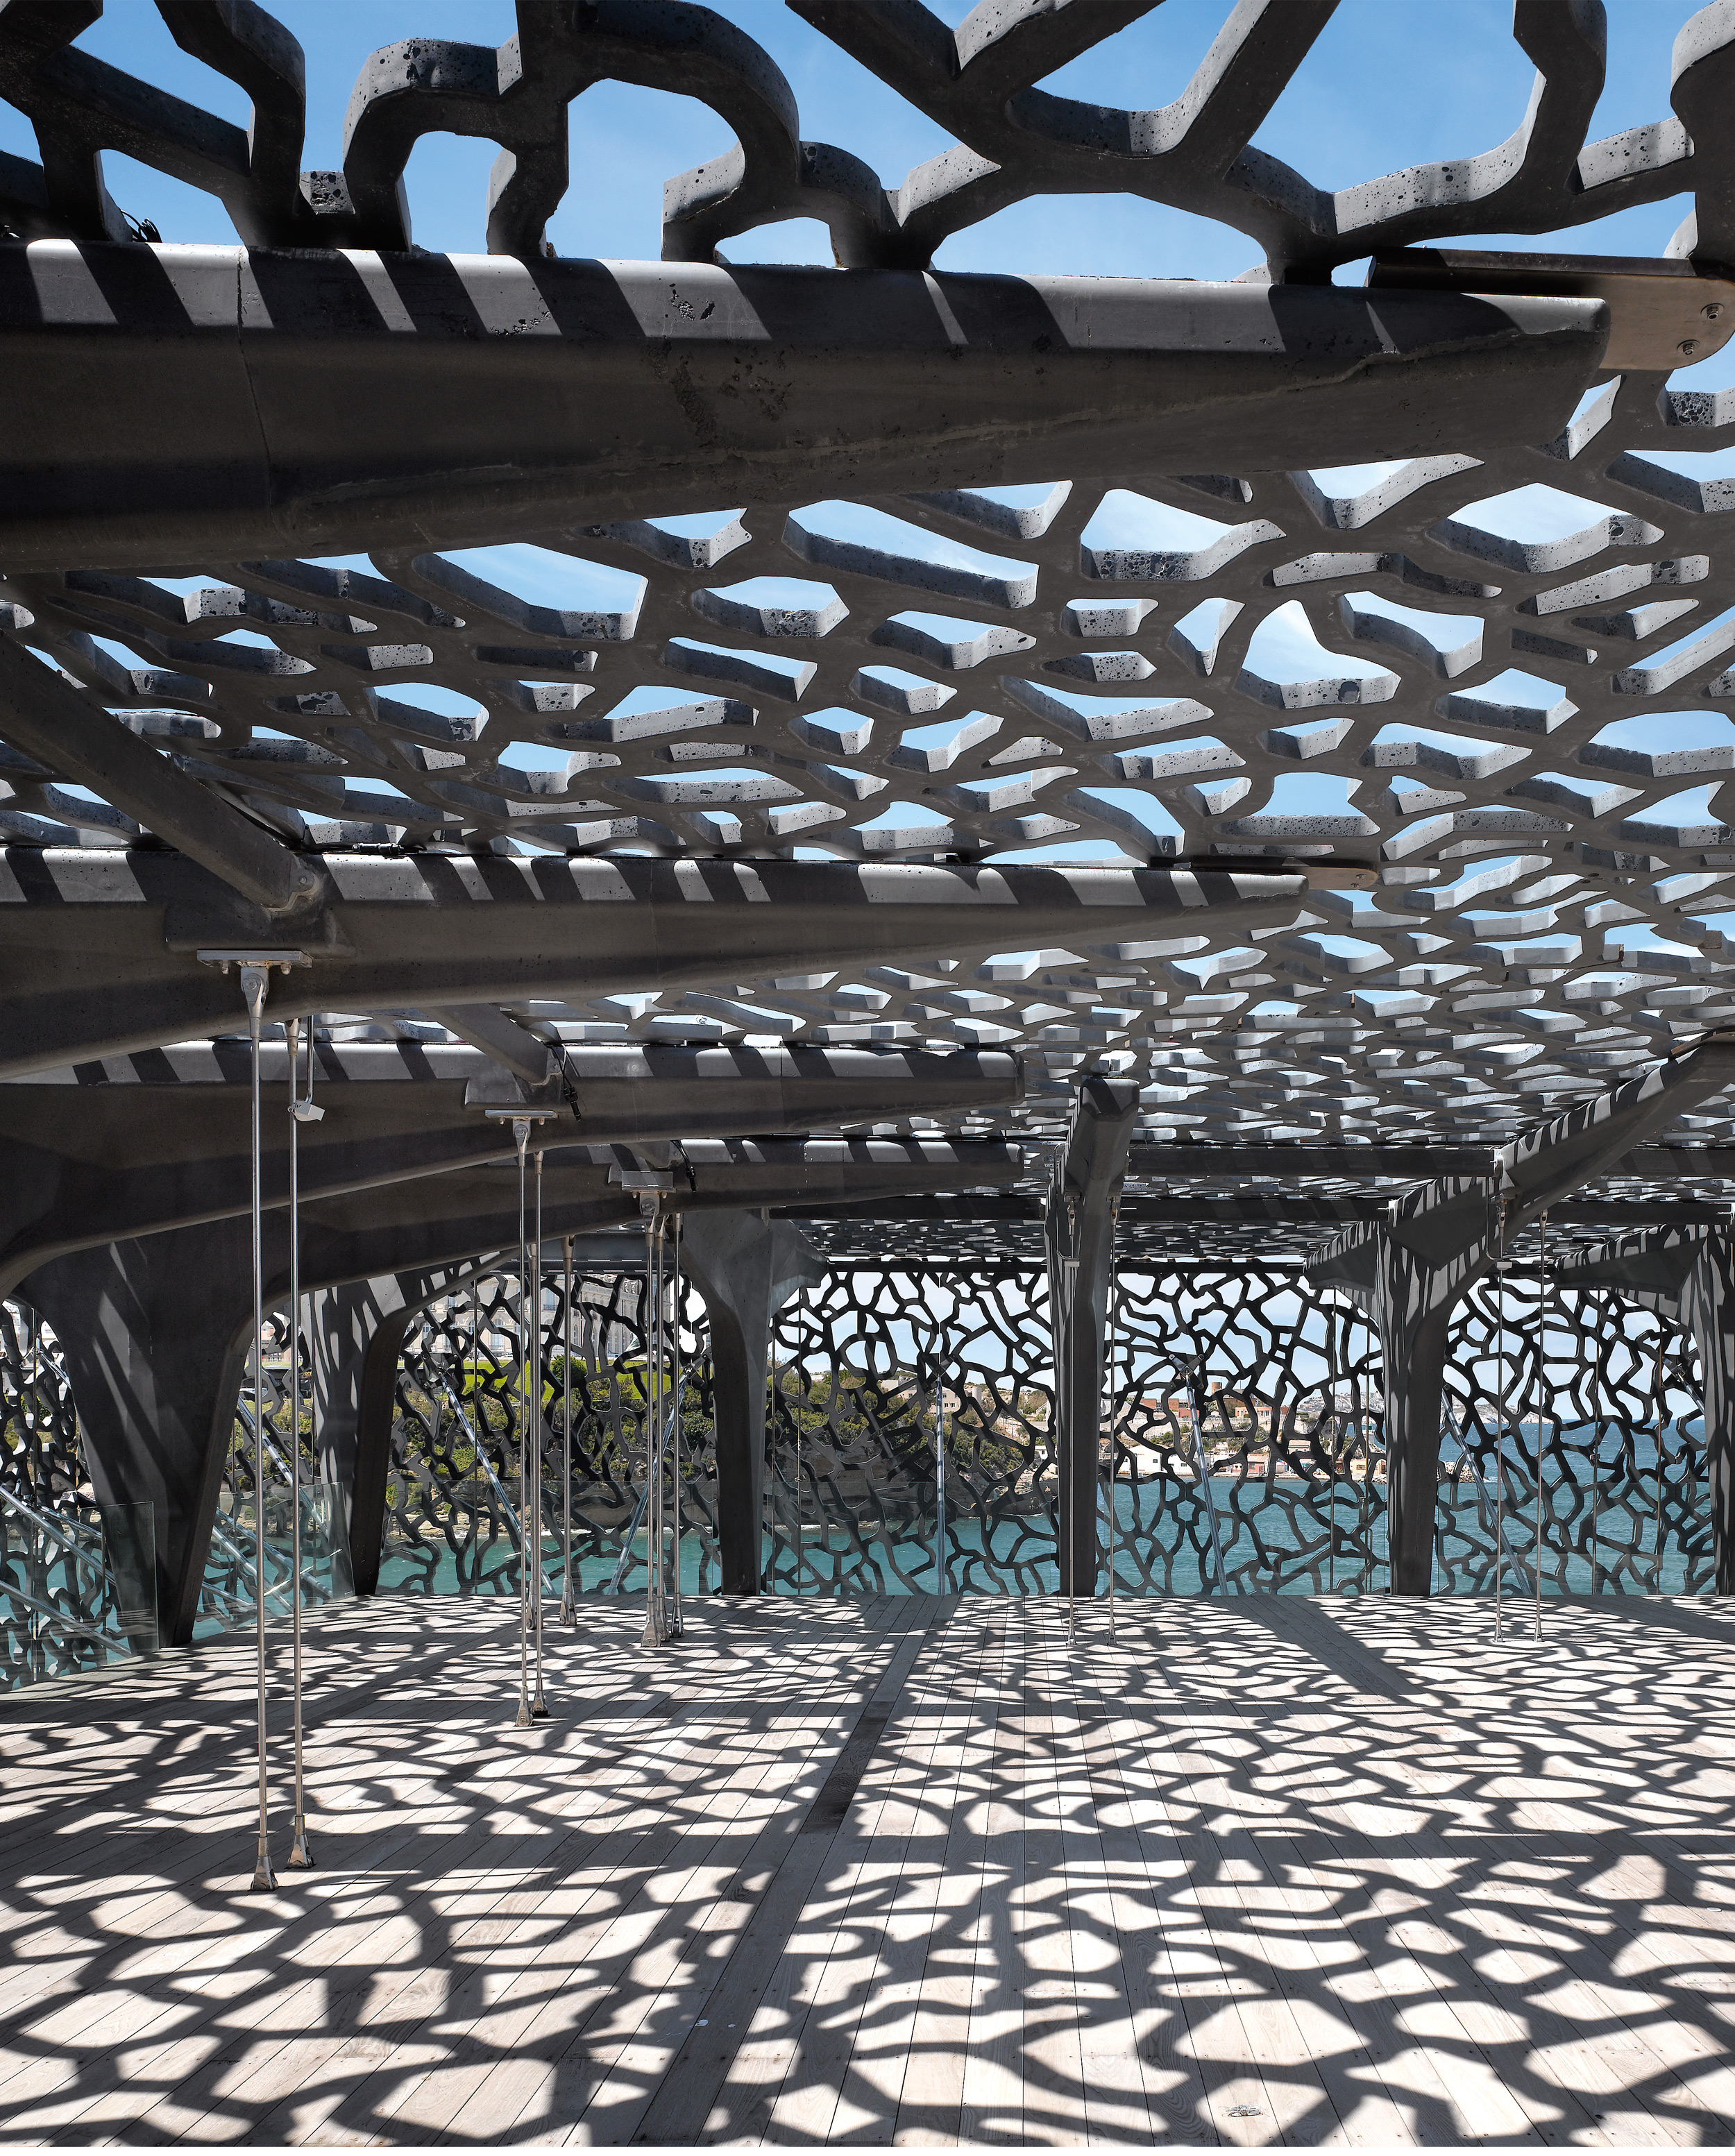 MuCEM / Museum of Civilizations of Europe and the Mediterranean